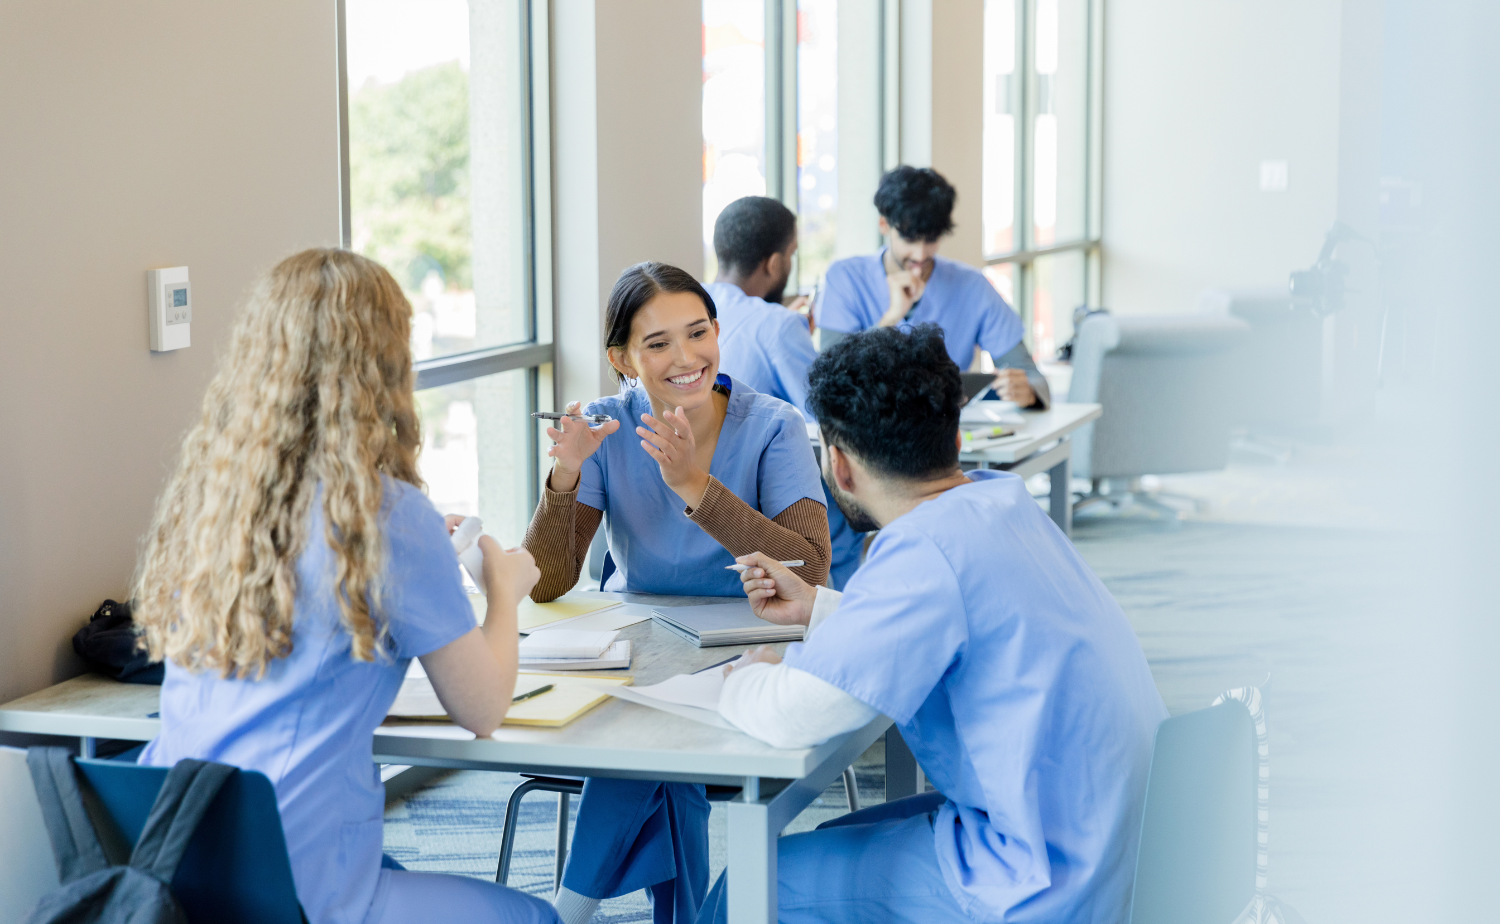 A group of healthcare students or professionals in blue scrubs are gathered around tables, engaged in animated discussion and collaboration, in a bright, modern setting with large windows.